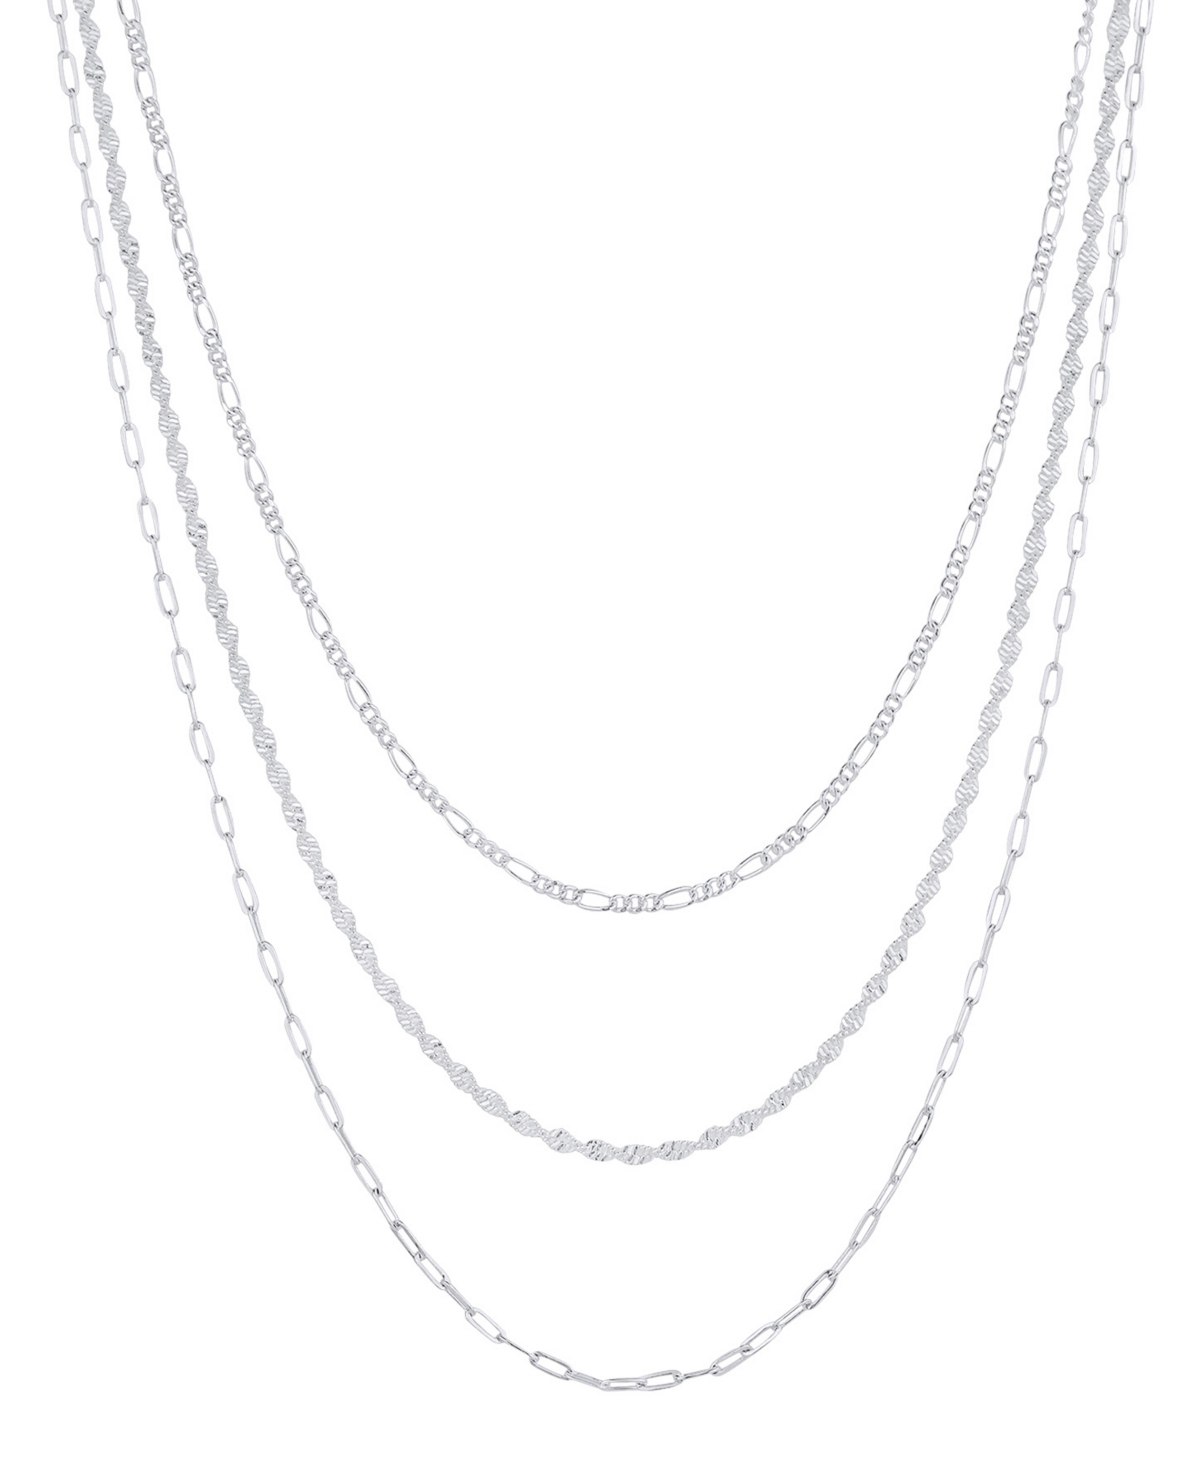 Silver Plated Chain 3Pc. Set - Silver